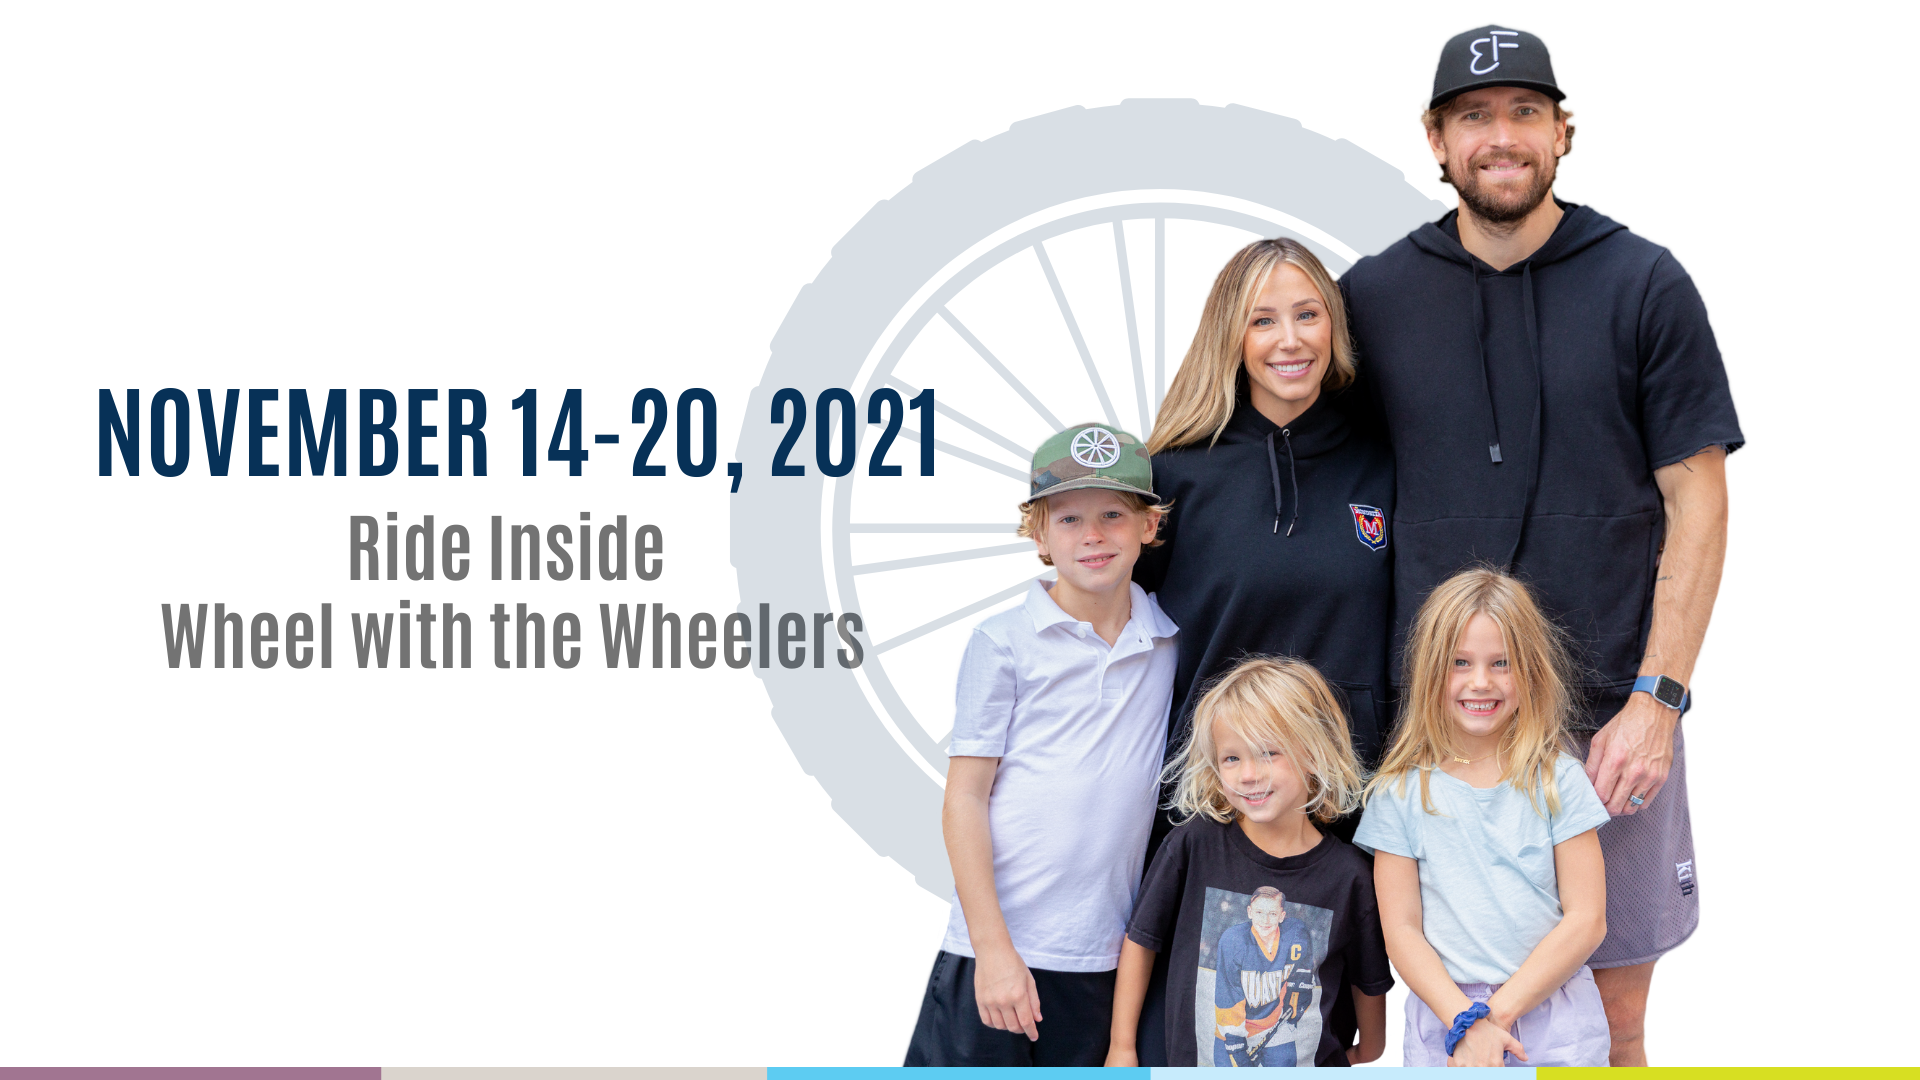 Wheel with the Wheelers in the 2021 Ride Inside